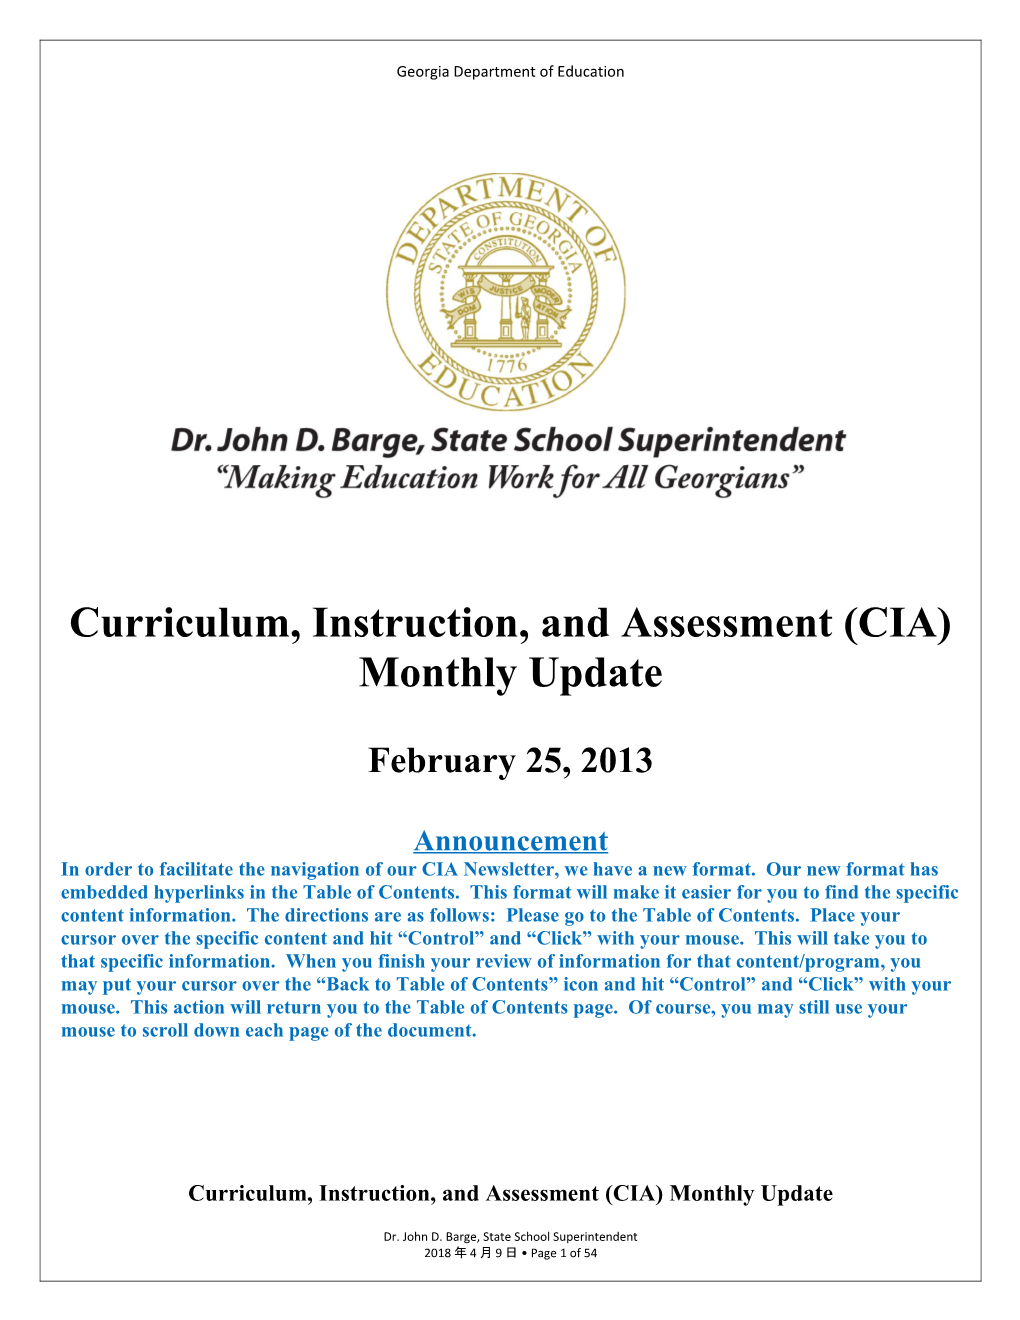 Curriculum, Instruction, and Assessment (CIA) Monthly Update